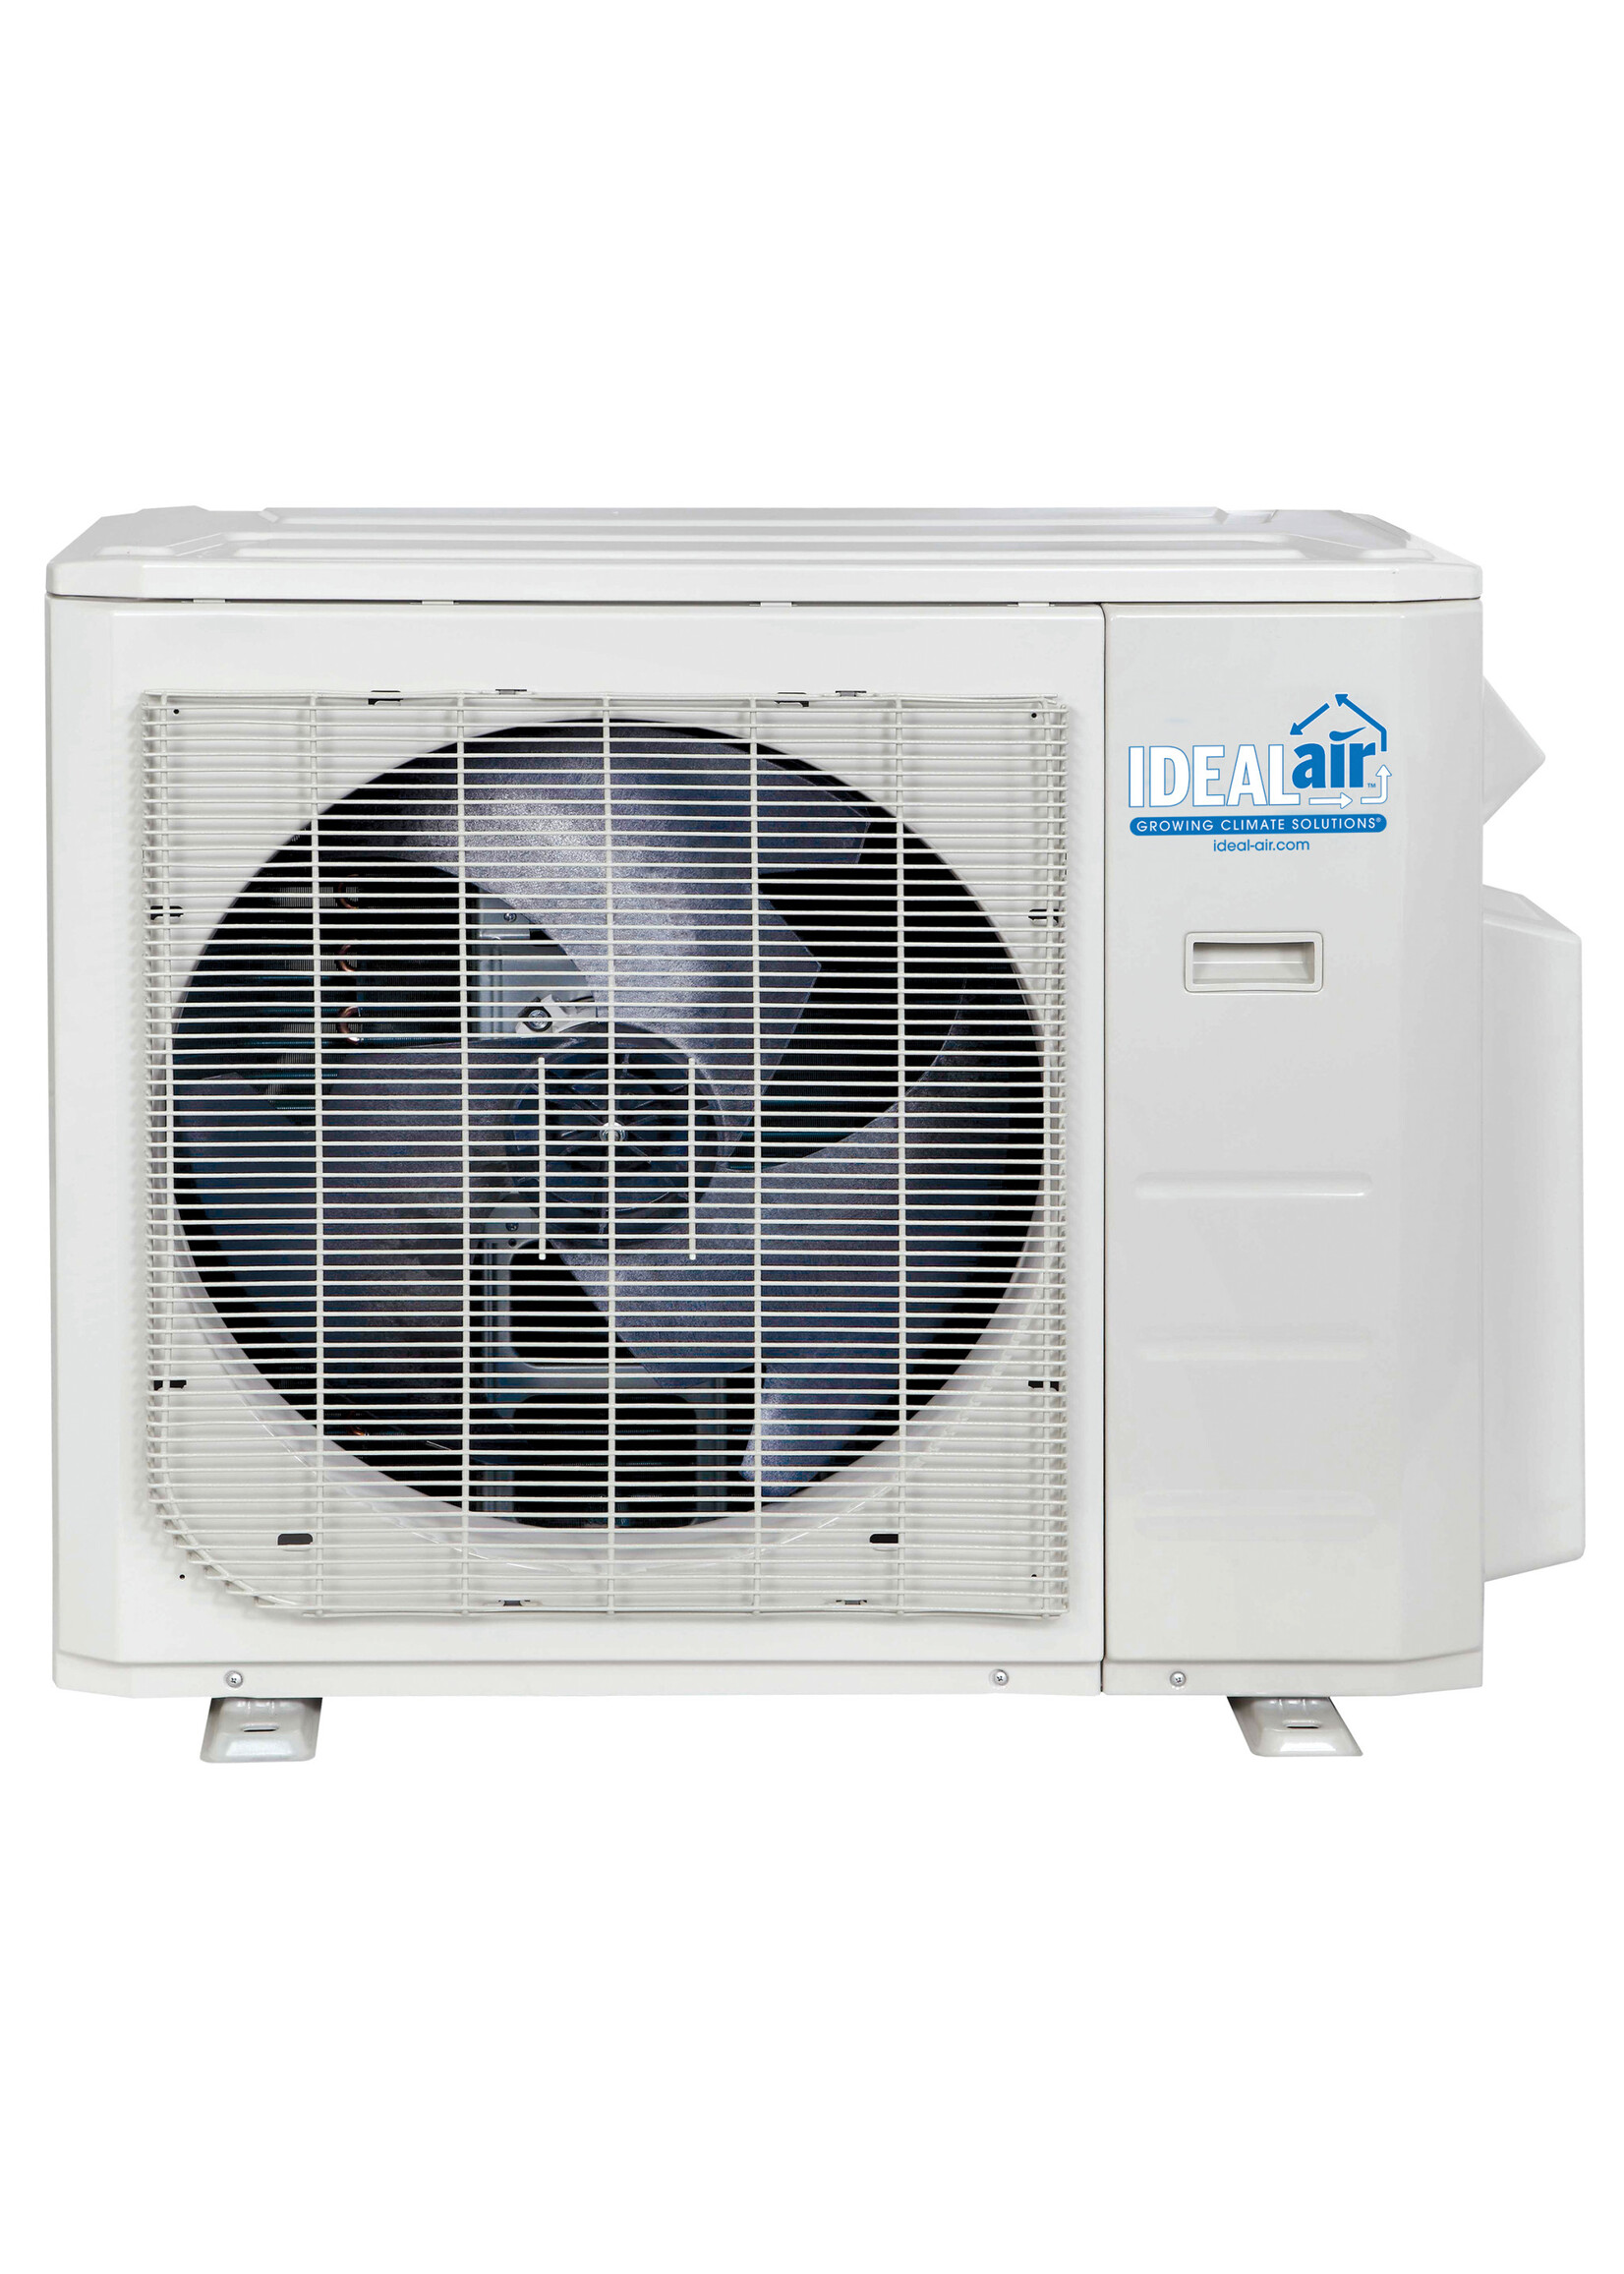 Ideal Air Ideal-Air Pro-Dual 24,000 BTU 22 SEER Multi-Zone Heating & Cooling Outdoor Unit